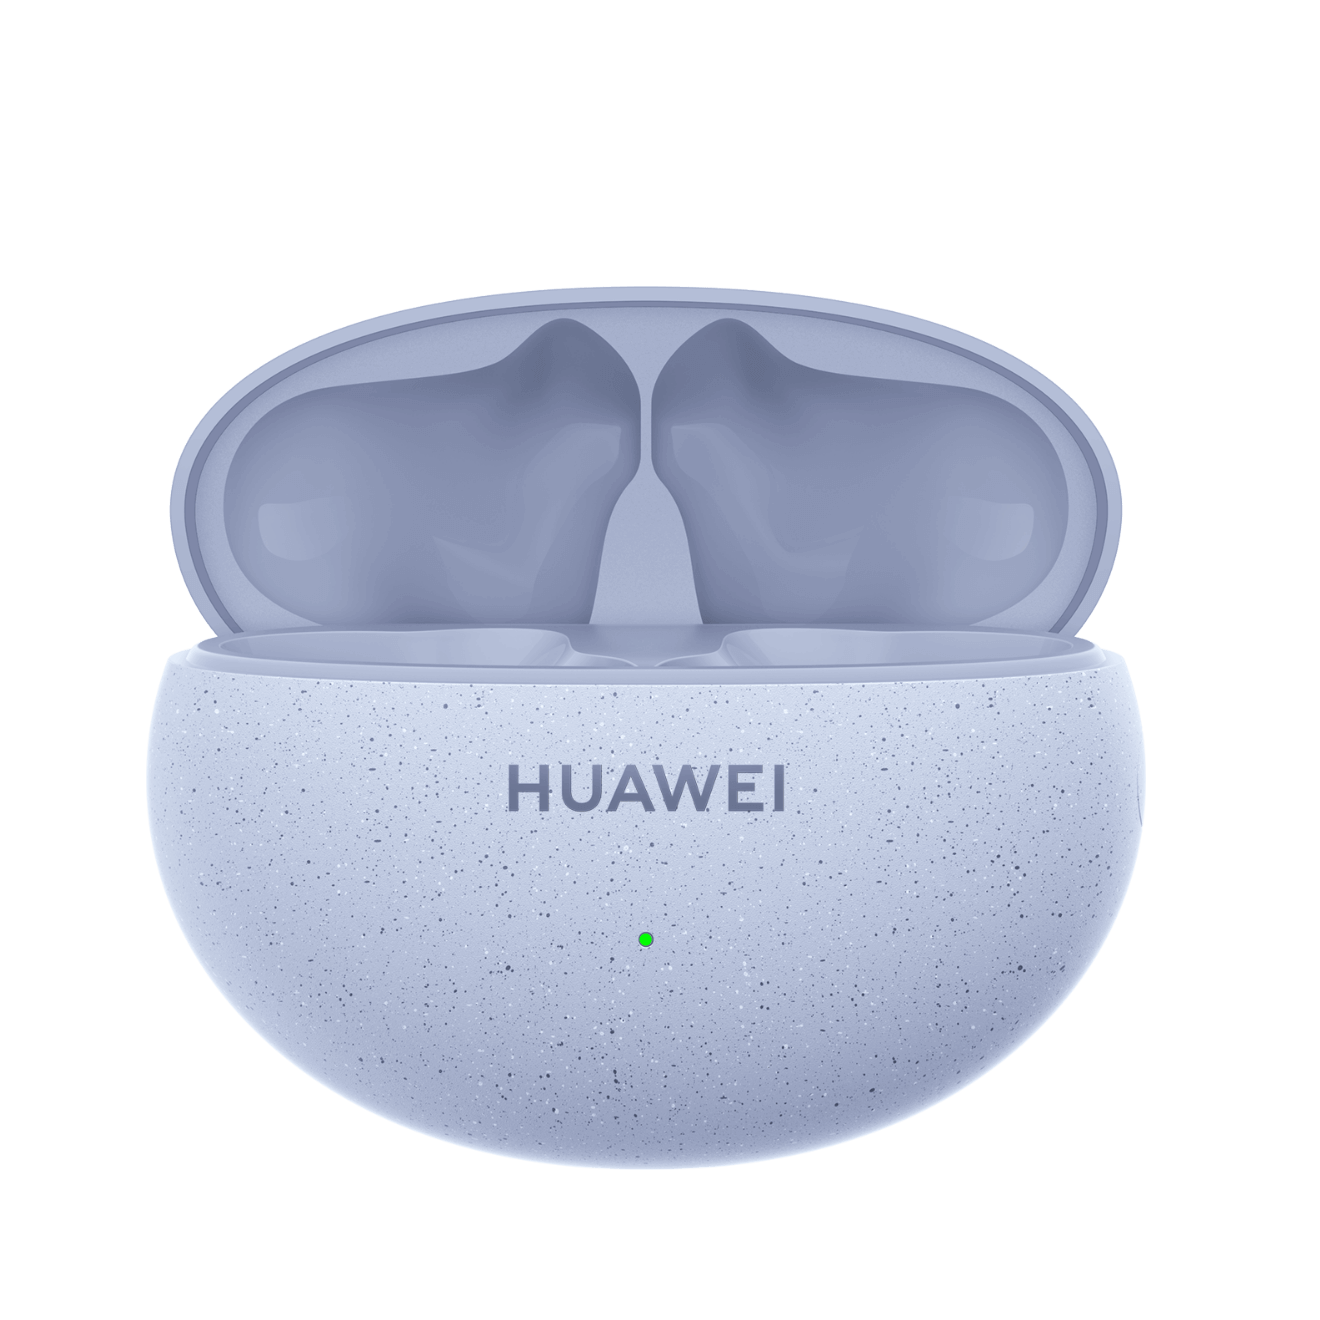 New HUAWEI FreeBuds 5i Wireless Headphone Dynamic Unit ANC Active Noise  Cancellation 42dB Hi-Res high-resolution sound quality